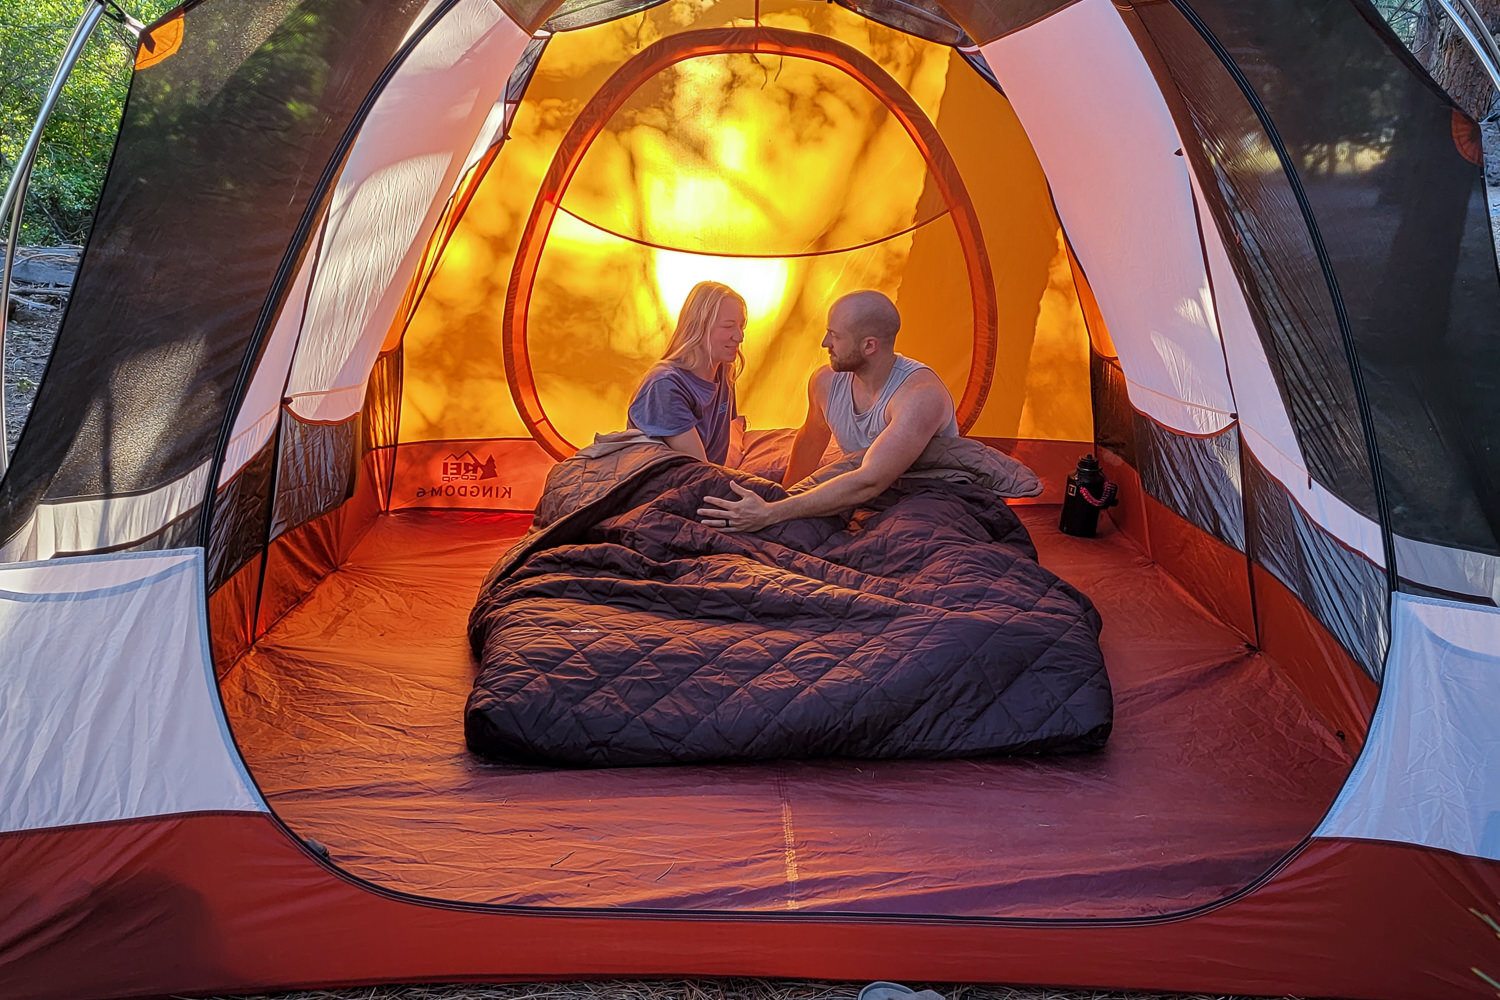 The REI Co-op Kingdom Insulated Sleep System 40 is great for those who tend to sleep warm on summer camping trips